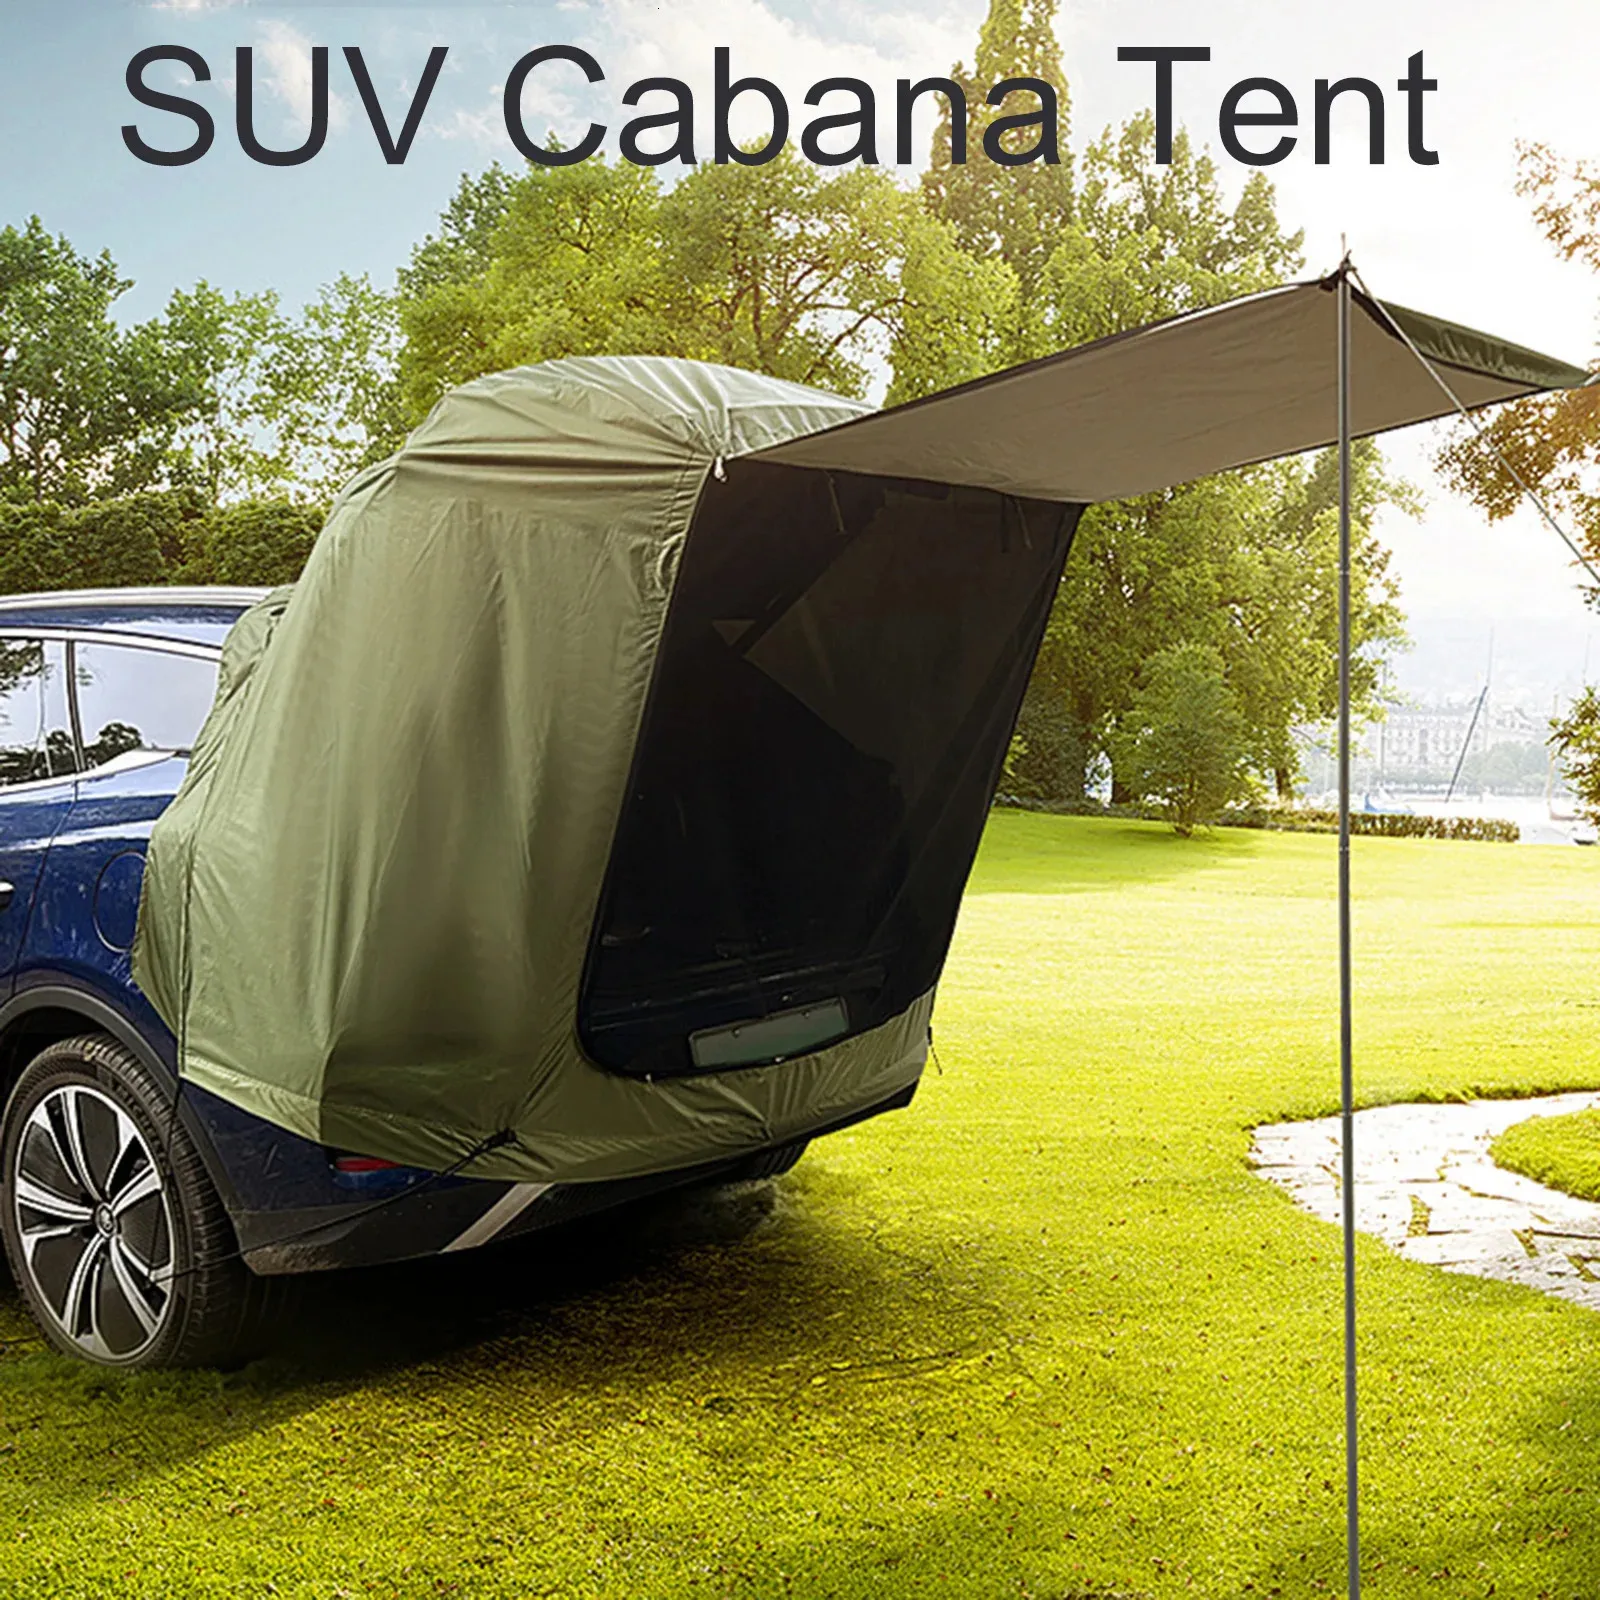 Tents and Shelters 1set Camping Kits SUV Cabana with Awning Shade Large Space Wide Vision Car Tailgate Tear-resistant Rear Tent Atta 231024